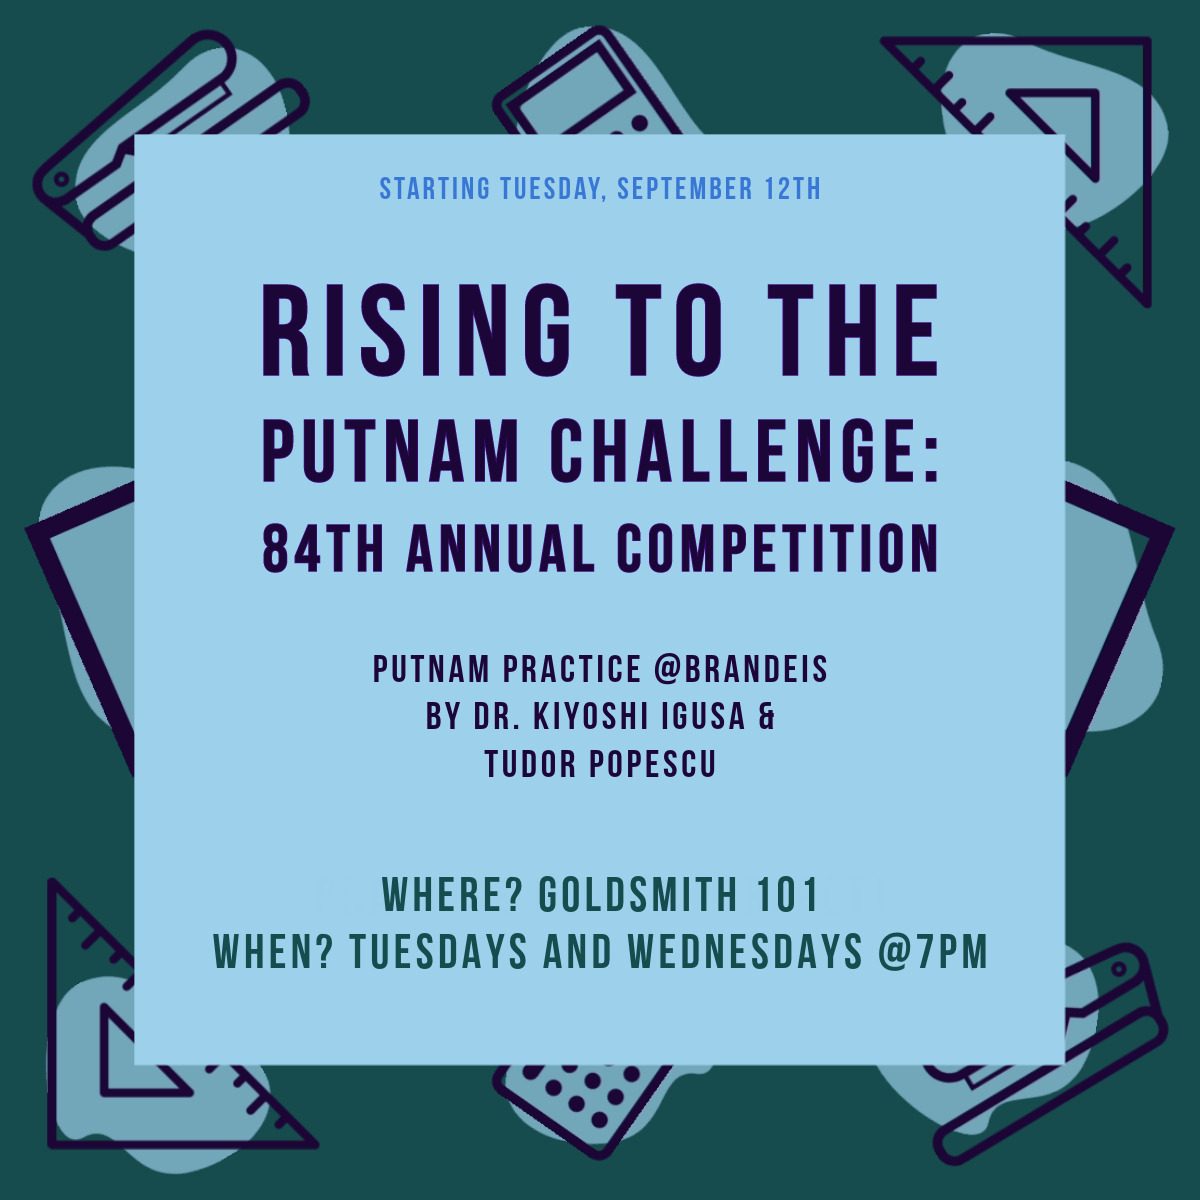 Starting Tuesday September 12, students are invited to the 84th Annual Putnam Challenge: Putnam Practice at Brandeis with Prof. Kiyoshi Igusa and Tudor Popescu. Where? Goldsmith 101. When? Tuesdays and Wednesdays at 7pm. Pizza!